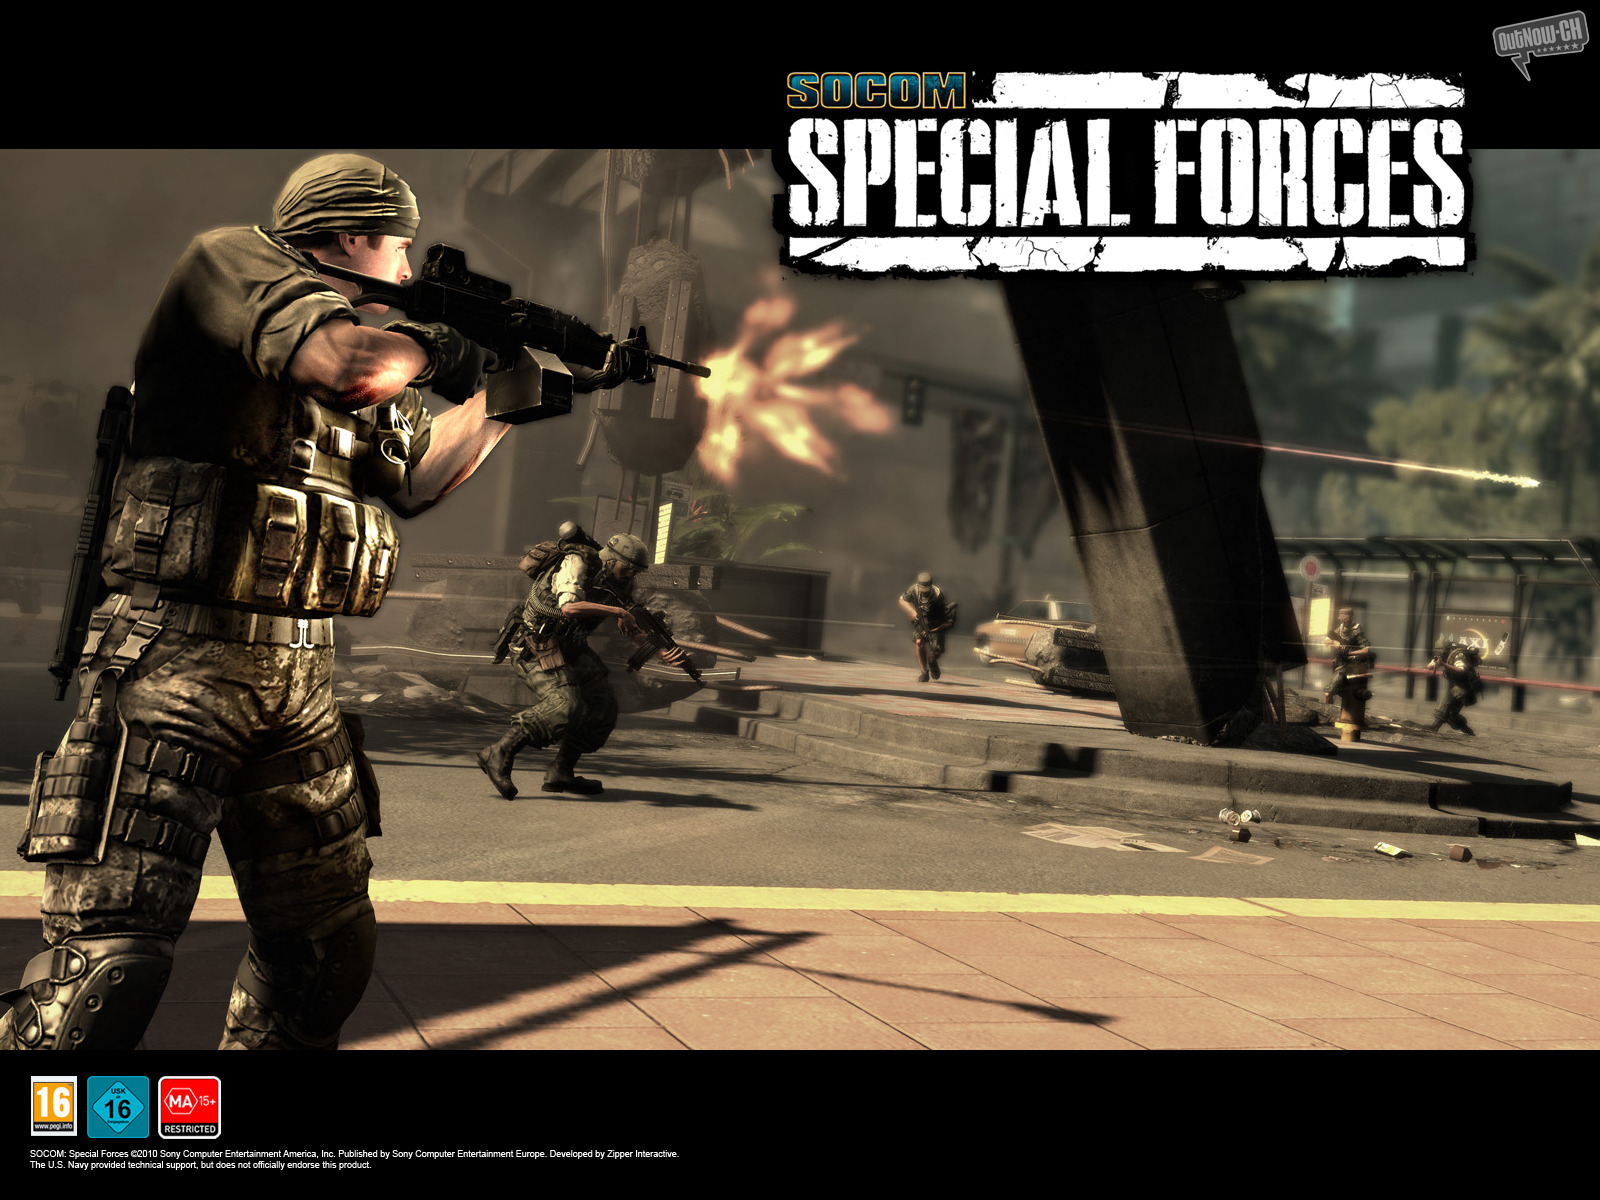 Video Game SOCOM: Special Forces HD Wallpaper | Background Image